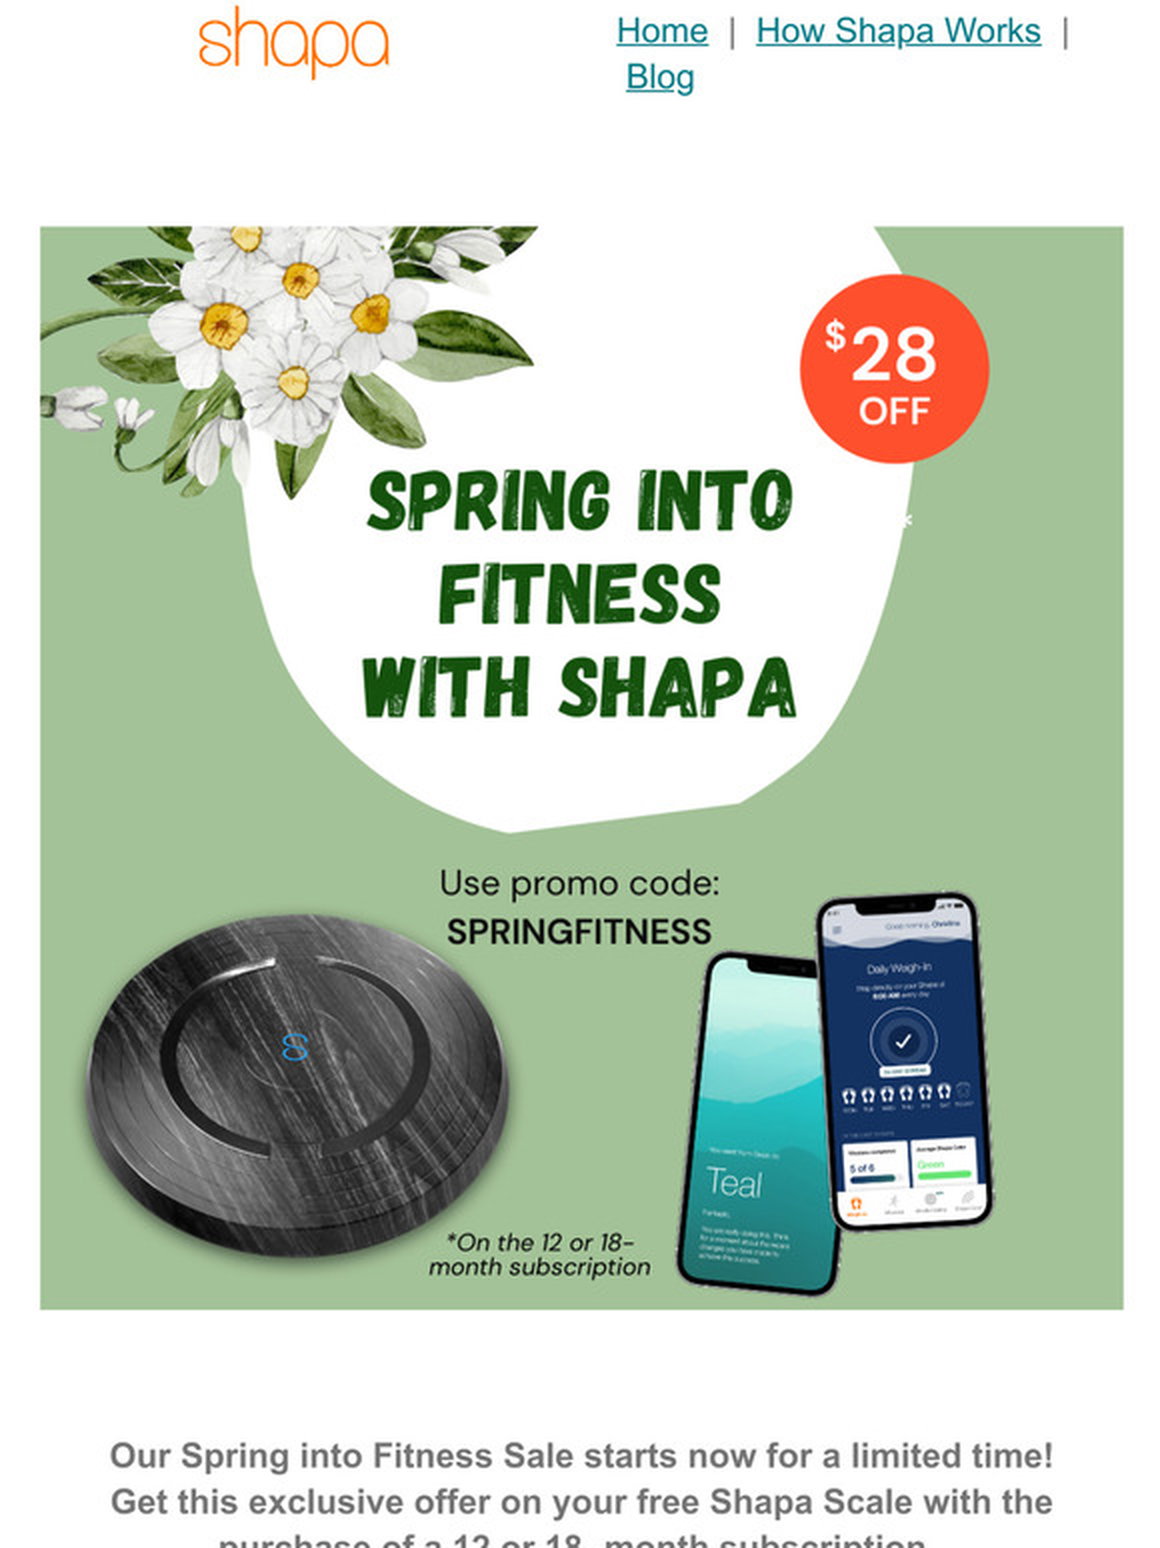 shapa: The Trend, The Science Behind Shapa, National Diabetes Month, and  more inside.